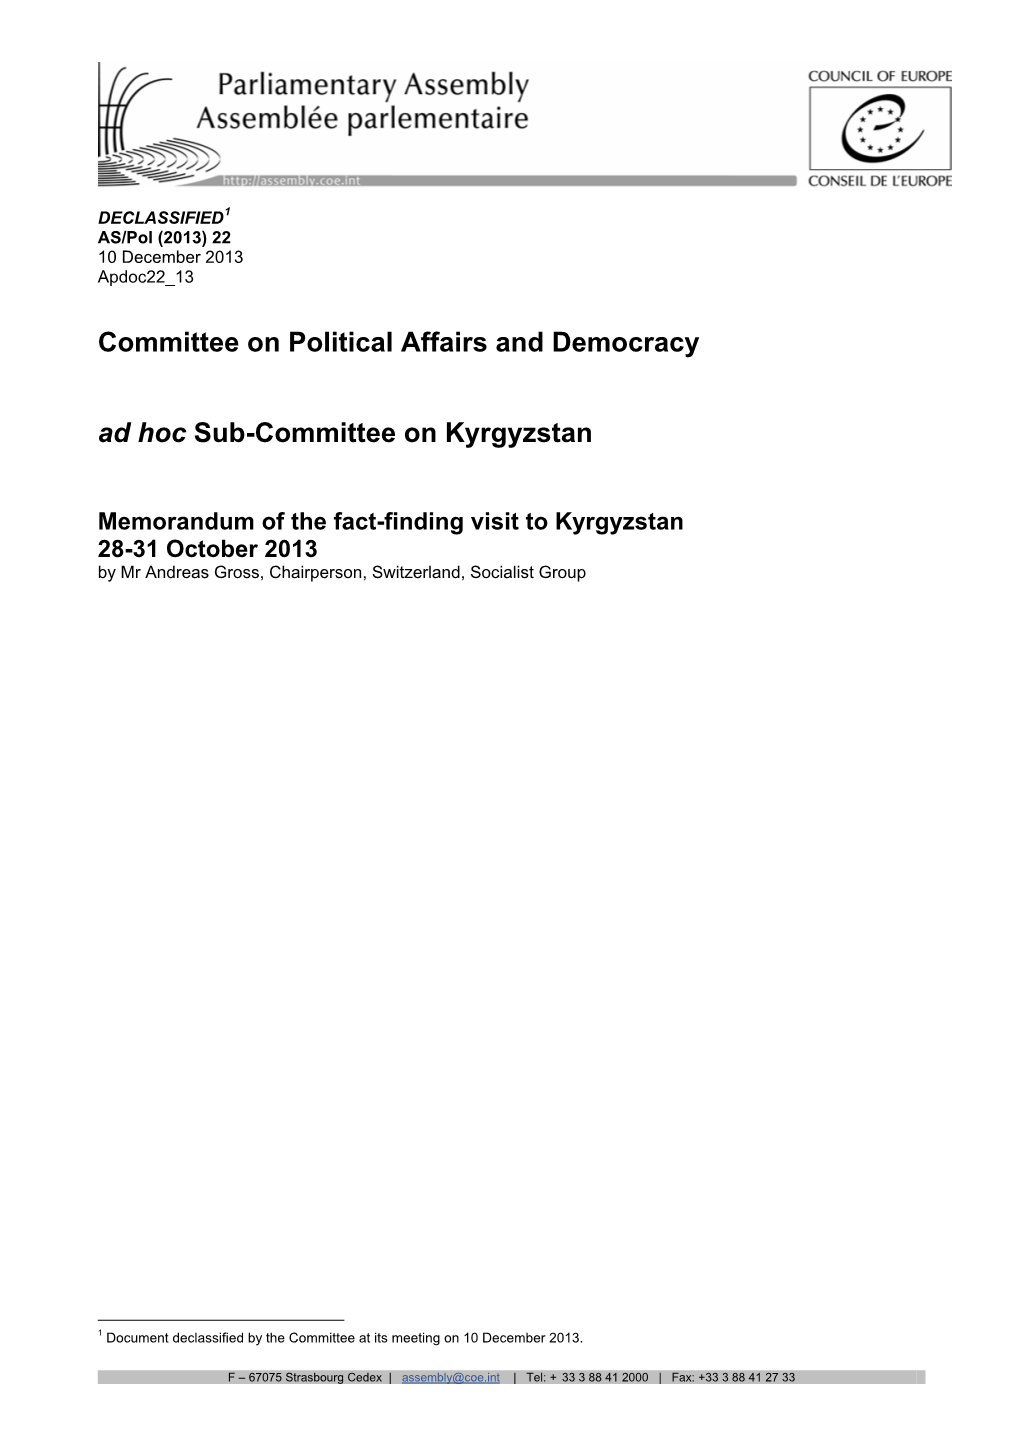 Committee on Political Affairs and Democracy Ad Hoc Sub-Committee